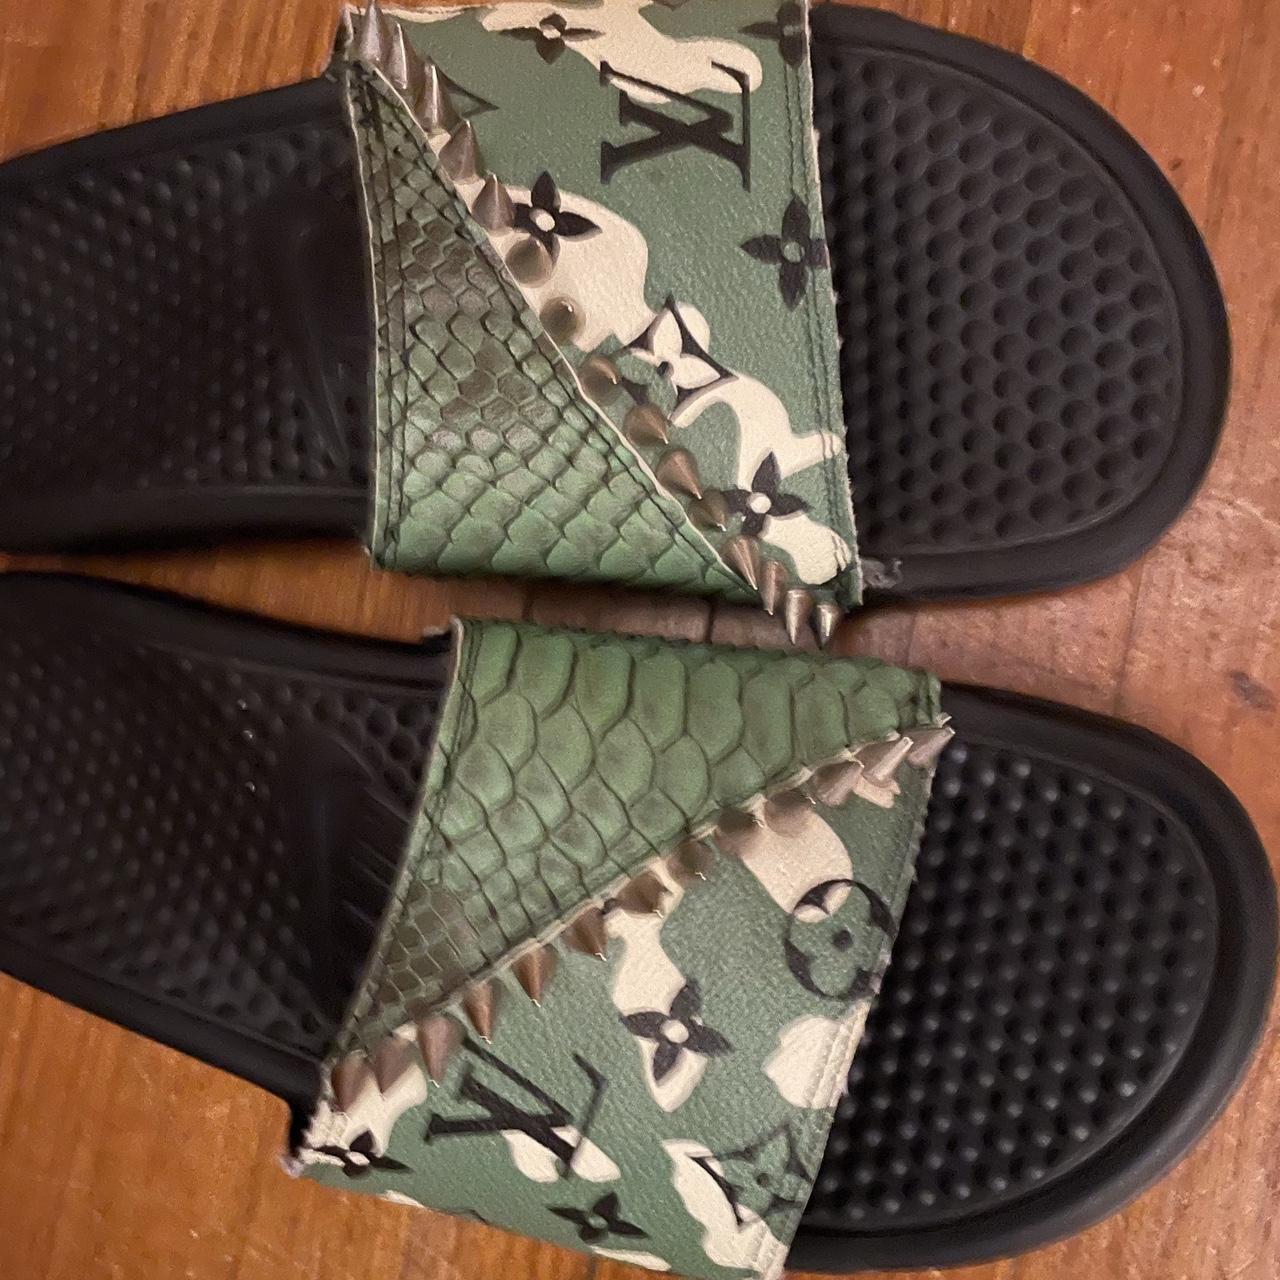 Custom LV x Nike slides and matching mask made by - Depop